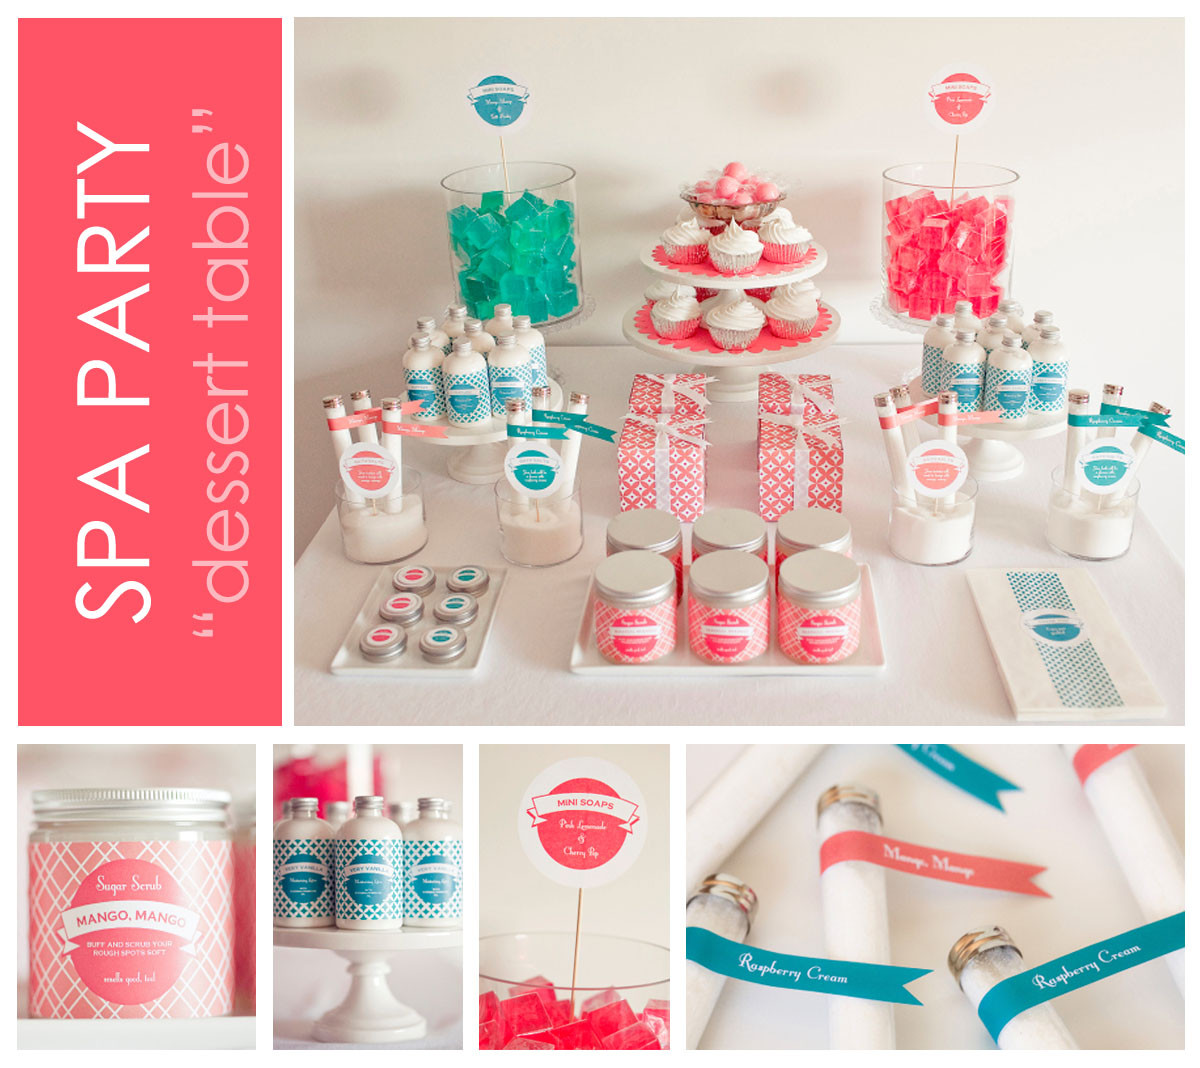 Spa Day Bachelorette Party Ideas
 A Craft a Day Birthday s on the Mind